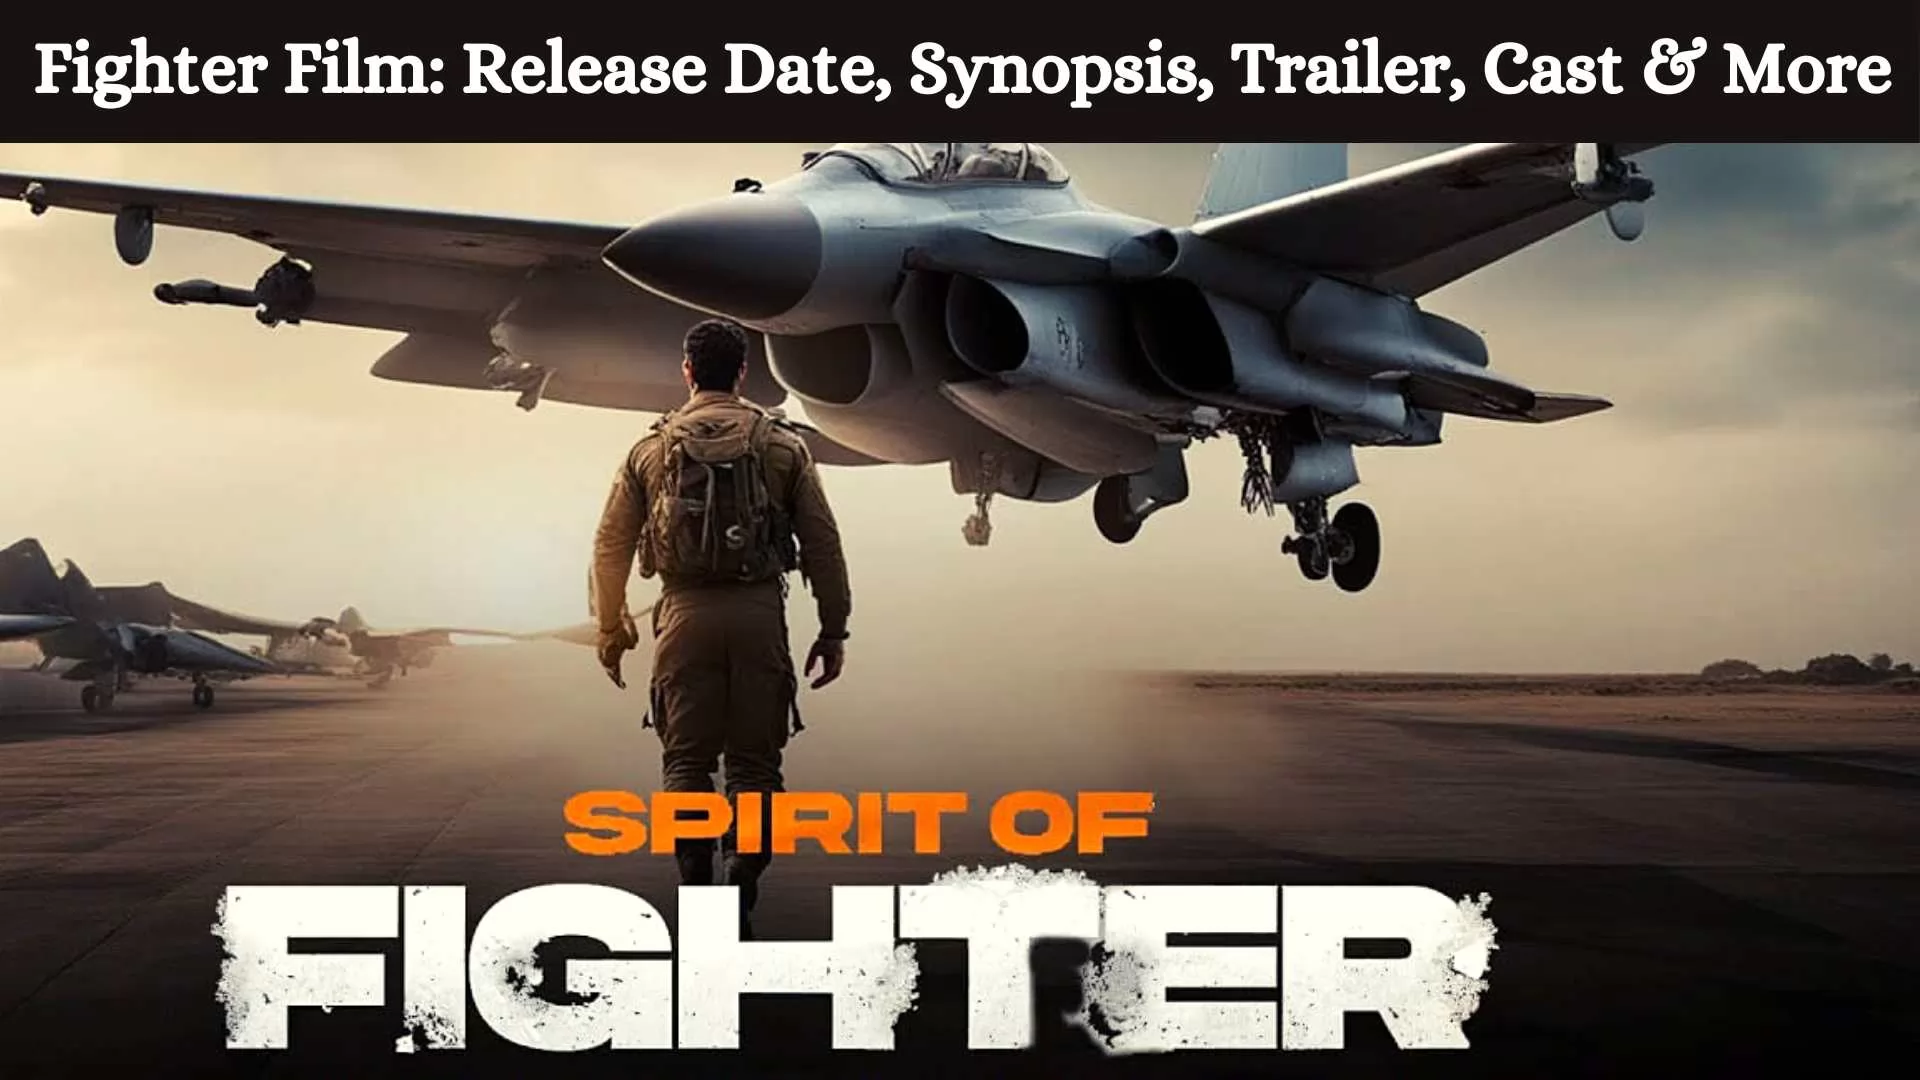 Fighter Film: Release Date, Synopsis, Trailer, Cast & More